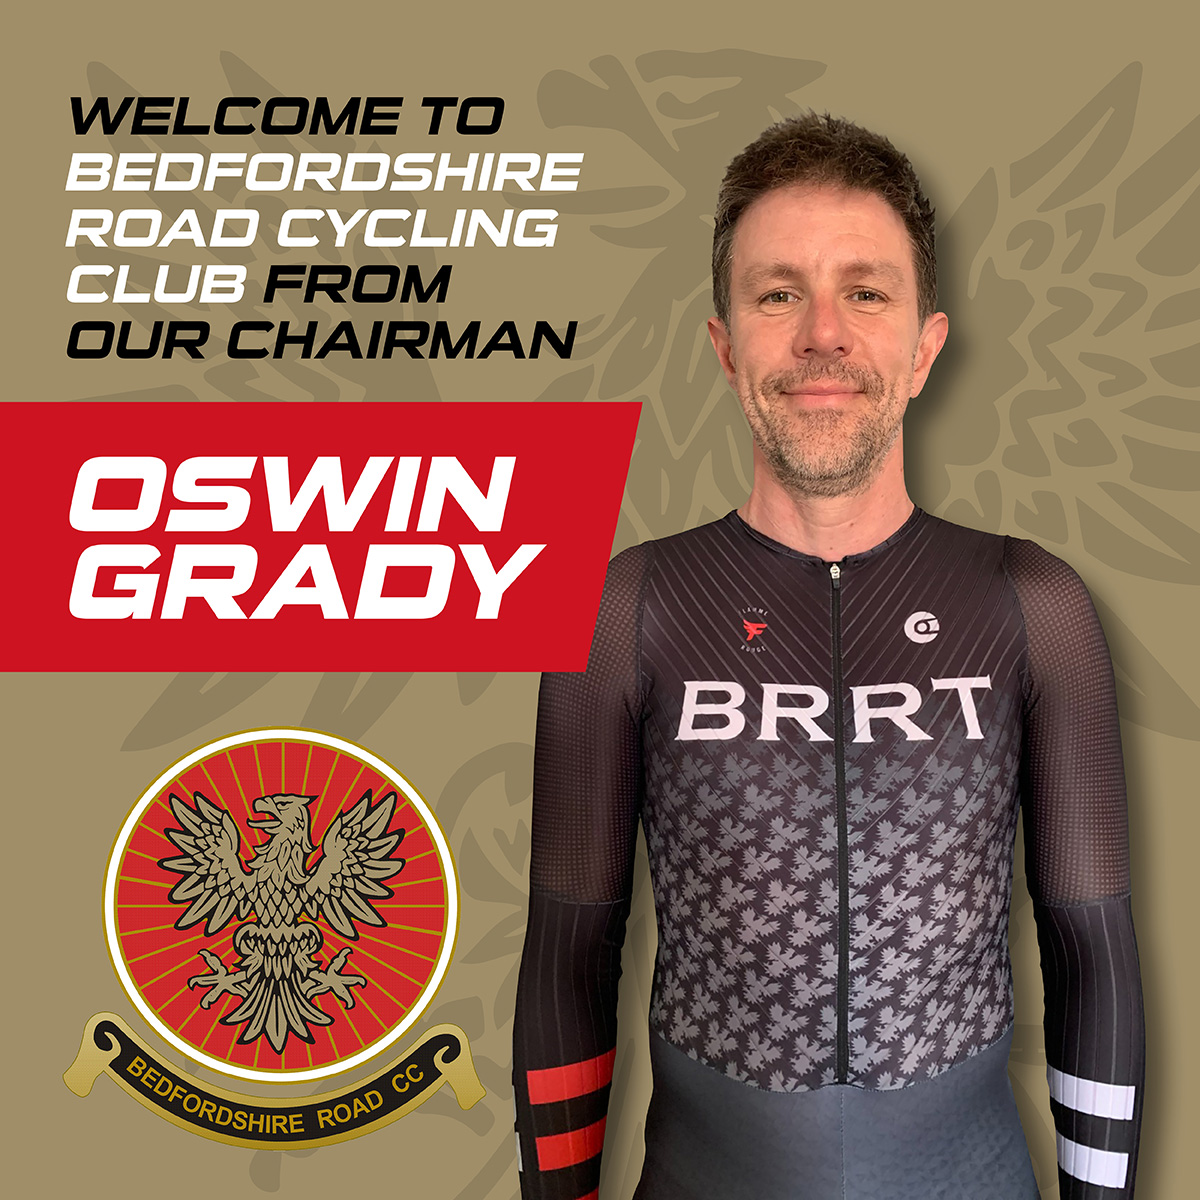 Welcome to Beds Roads Cycling Club! We thought you'd like to meet some of our members... First up, is a note from our newly appointed Club Chairman-Introducing: Oswin Grady Visit: facebook.com/BedsRoadCC/